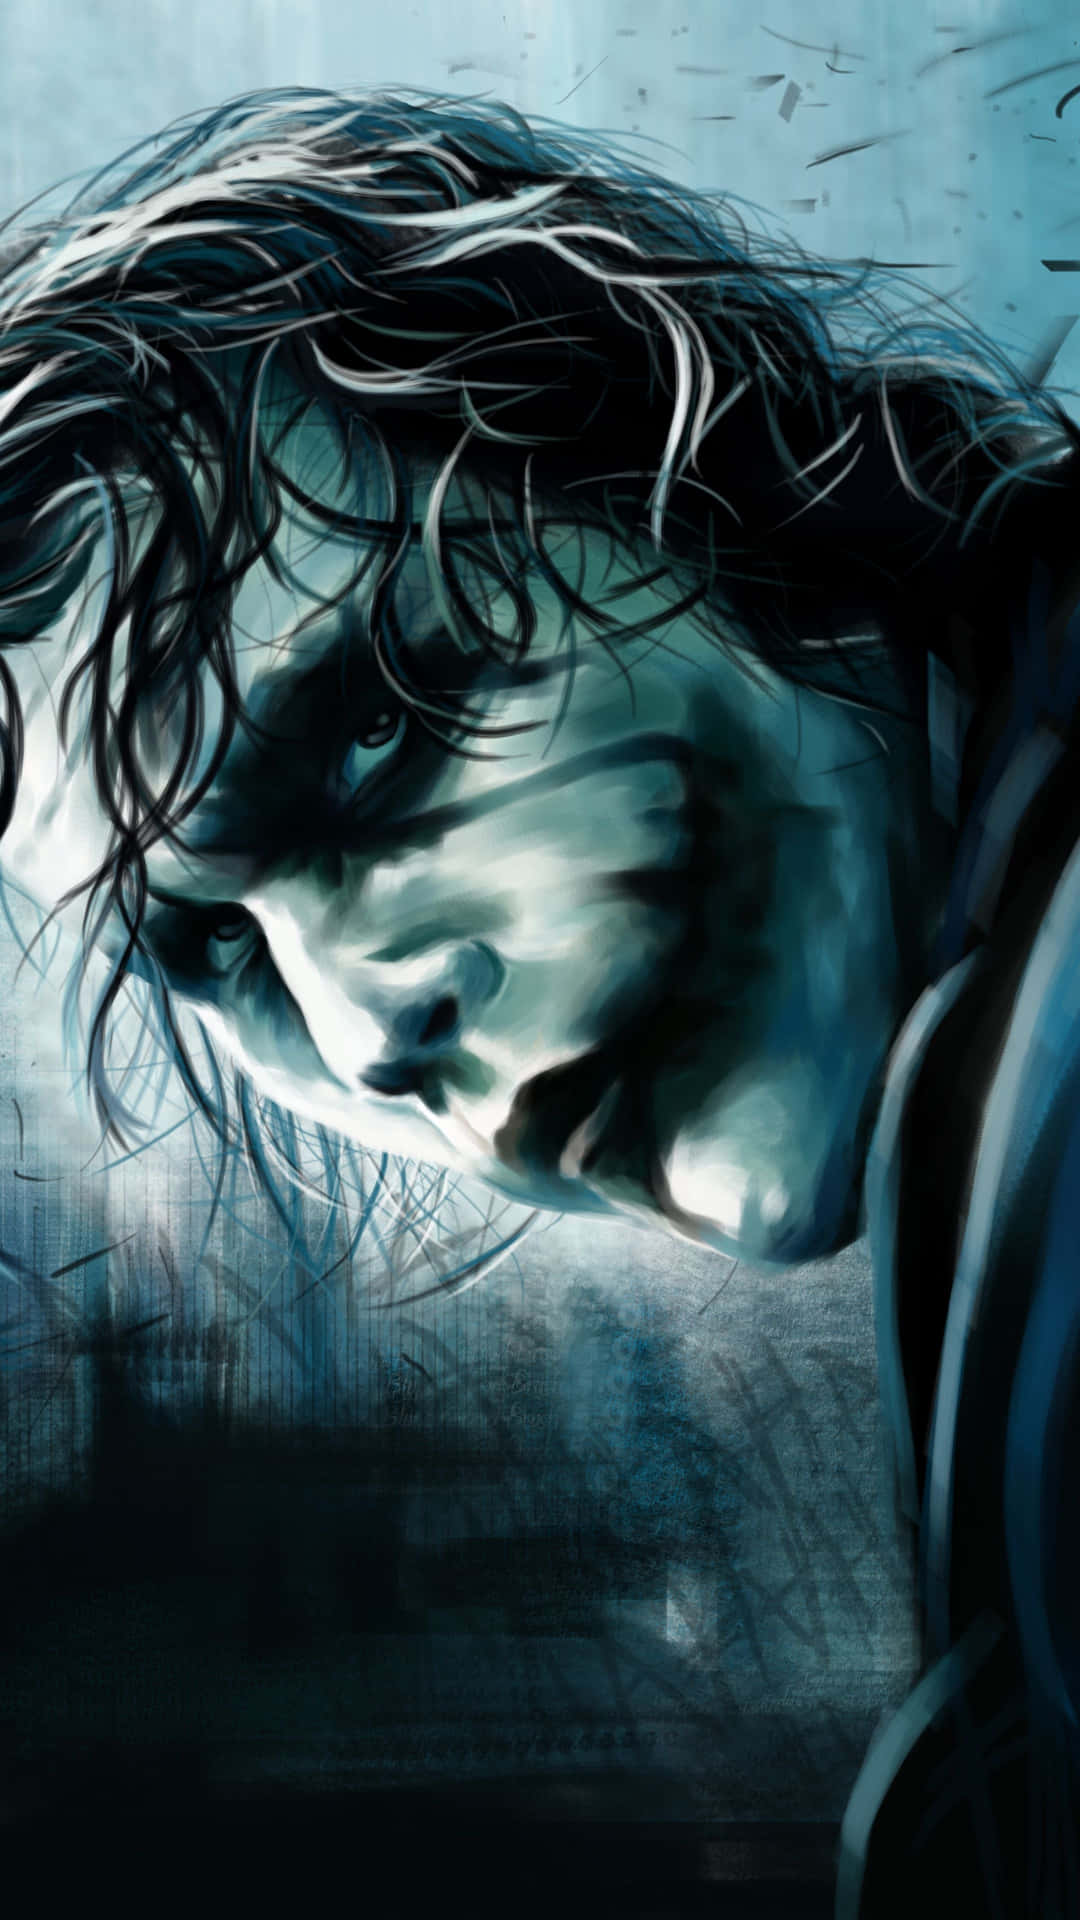 Captivating and Mysterious - Watch the Dark Tale Unfold in Joker Wallpaper